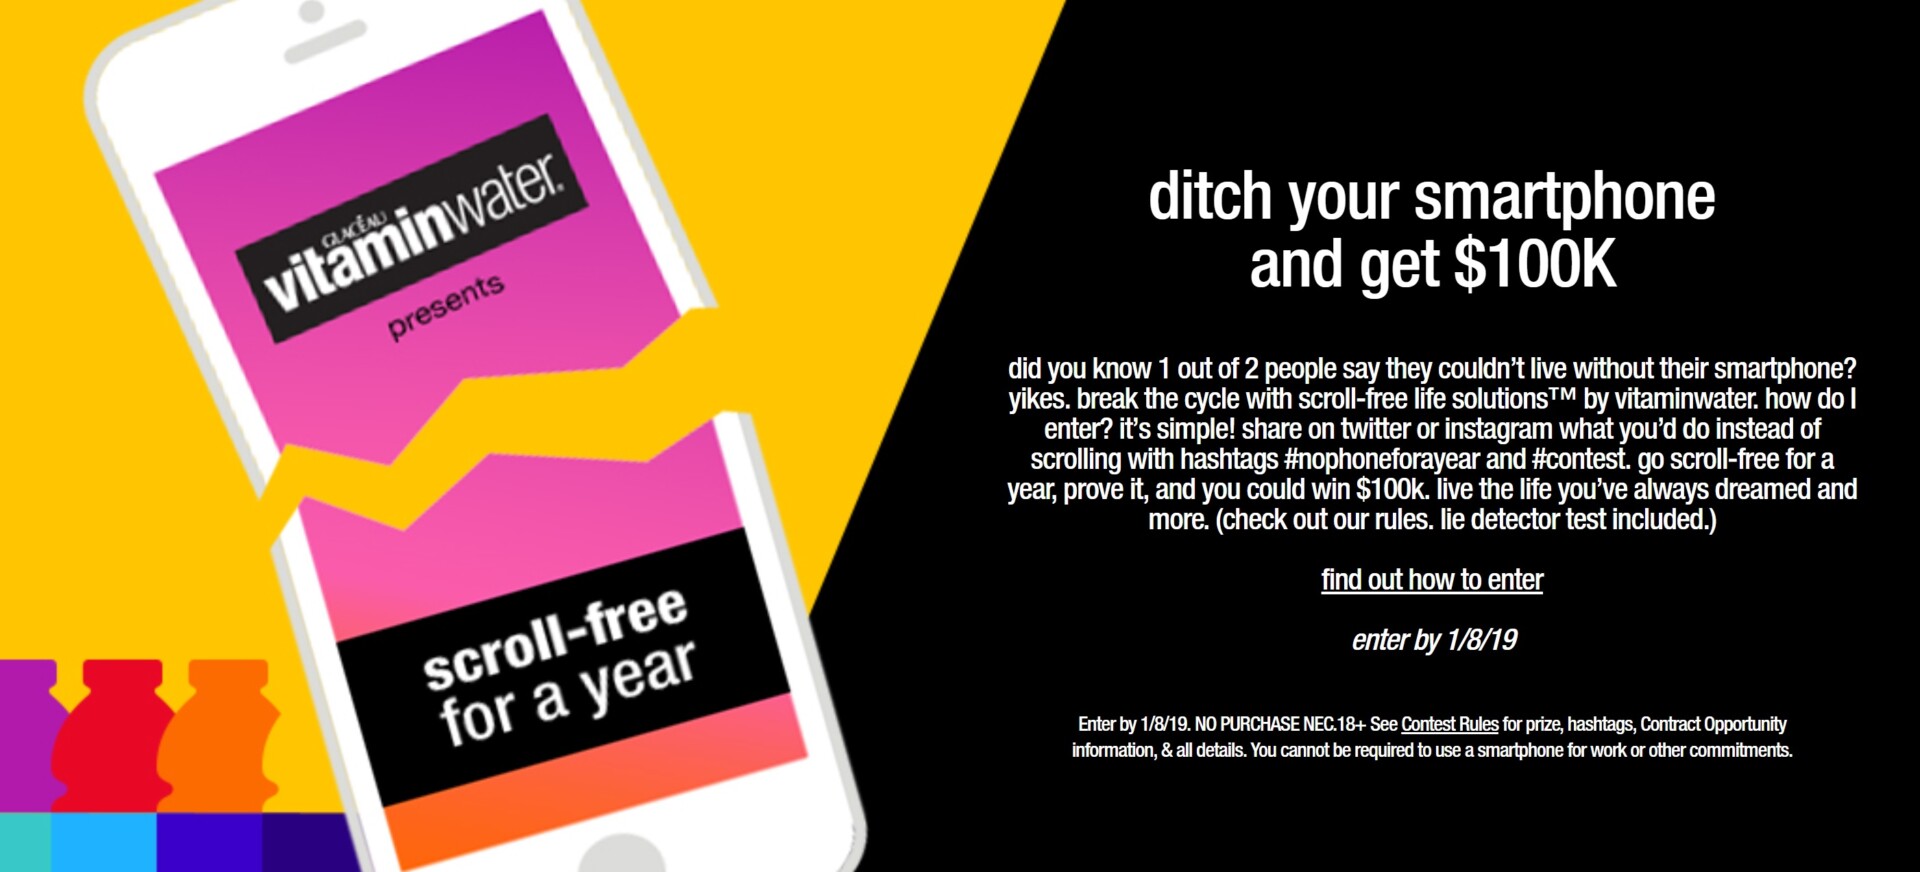 Vitaminwater competition promo image featuring a phone breaking in half.